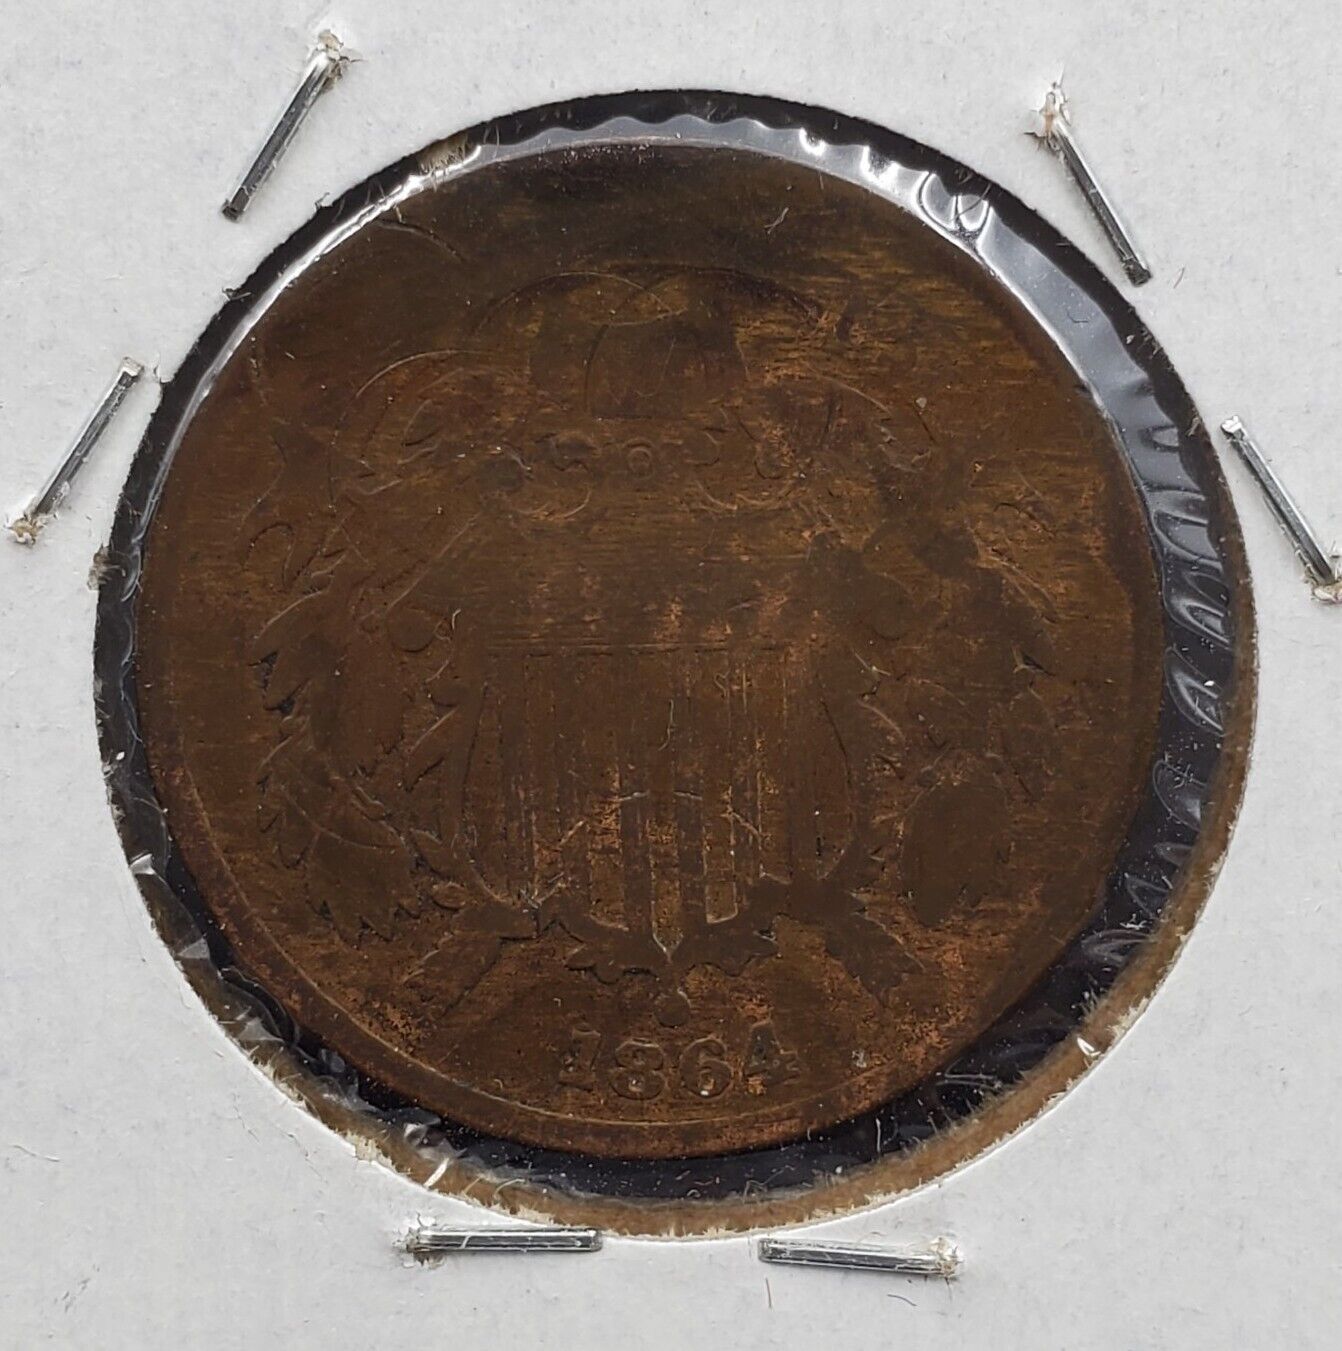 1864 P 2C Two Cent Copper Coin OUT OF PRODUCTION DENOMINATION Circulated